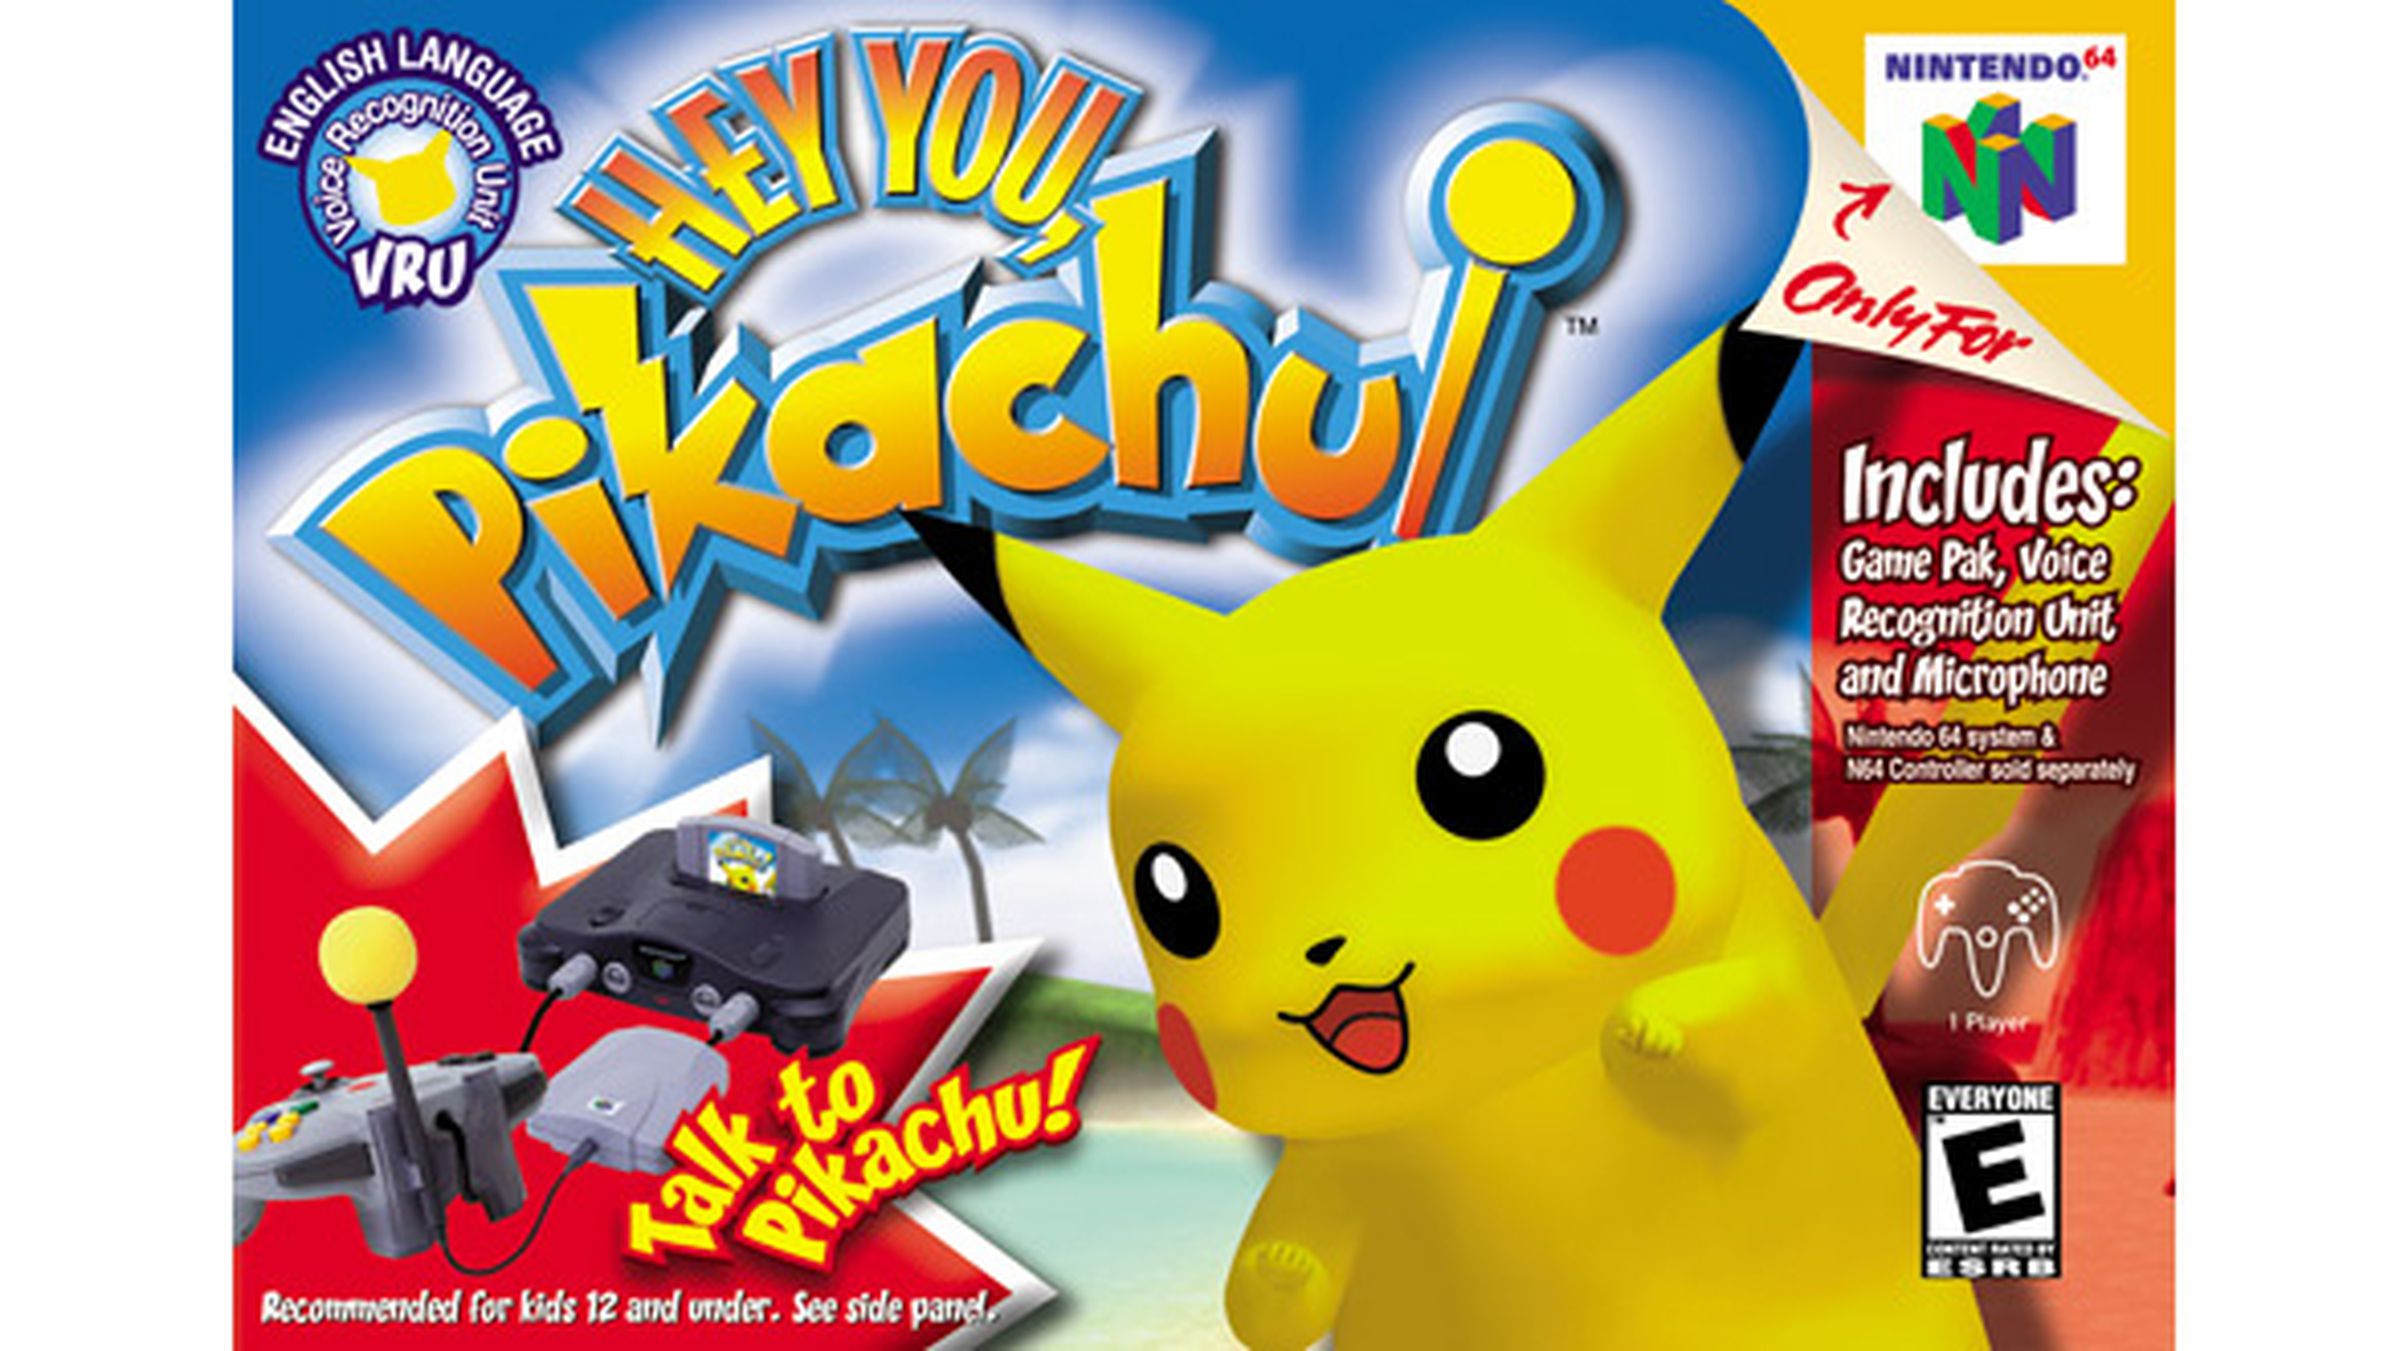 The box art for Hey You Pikachu